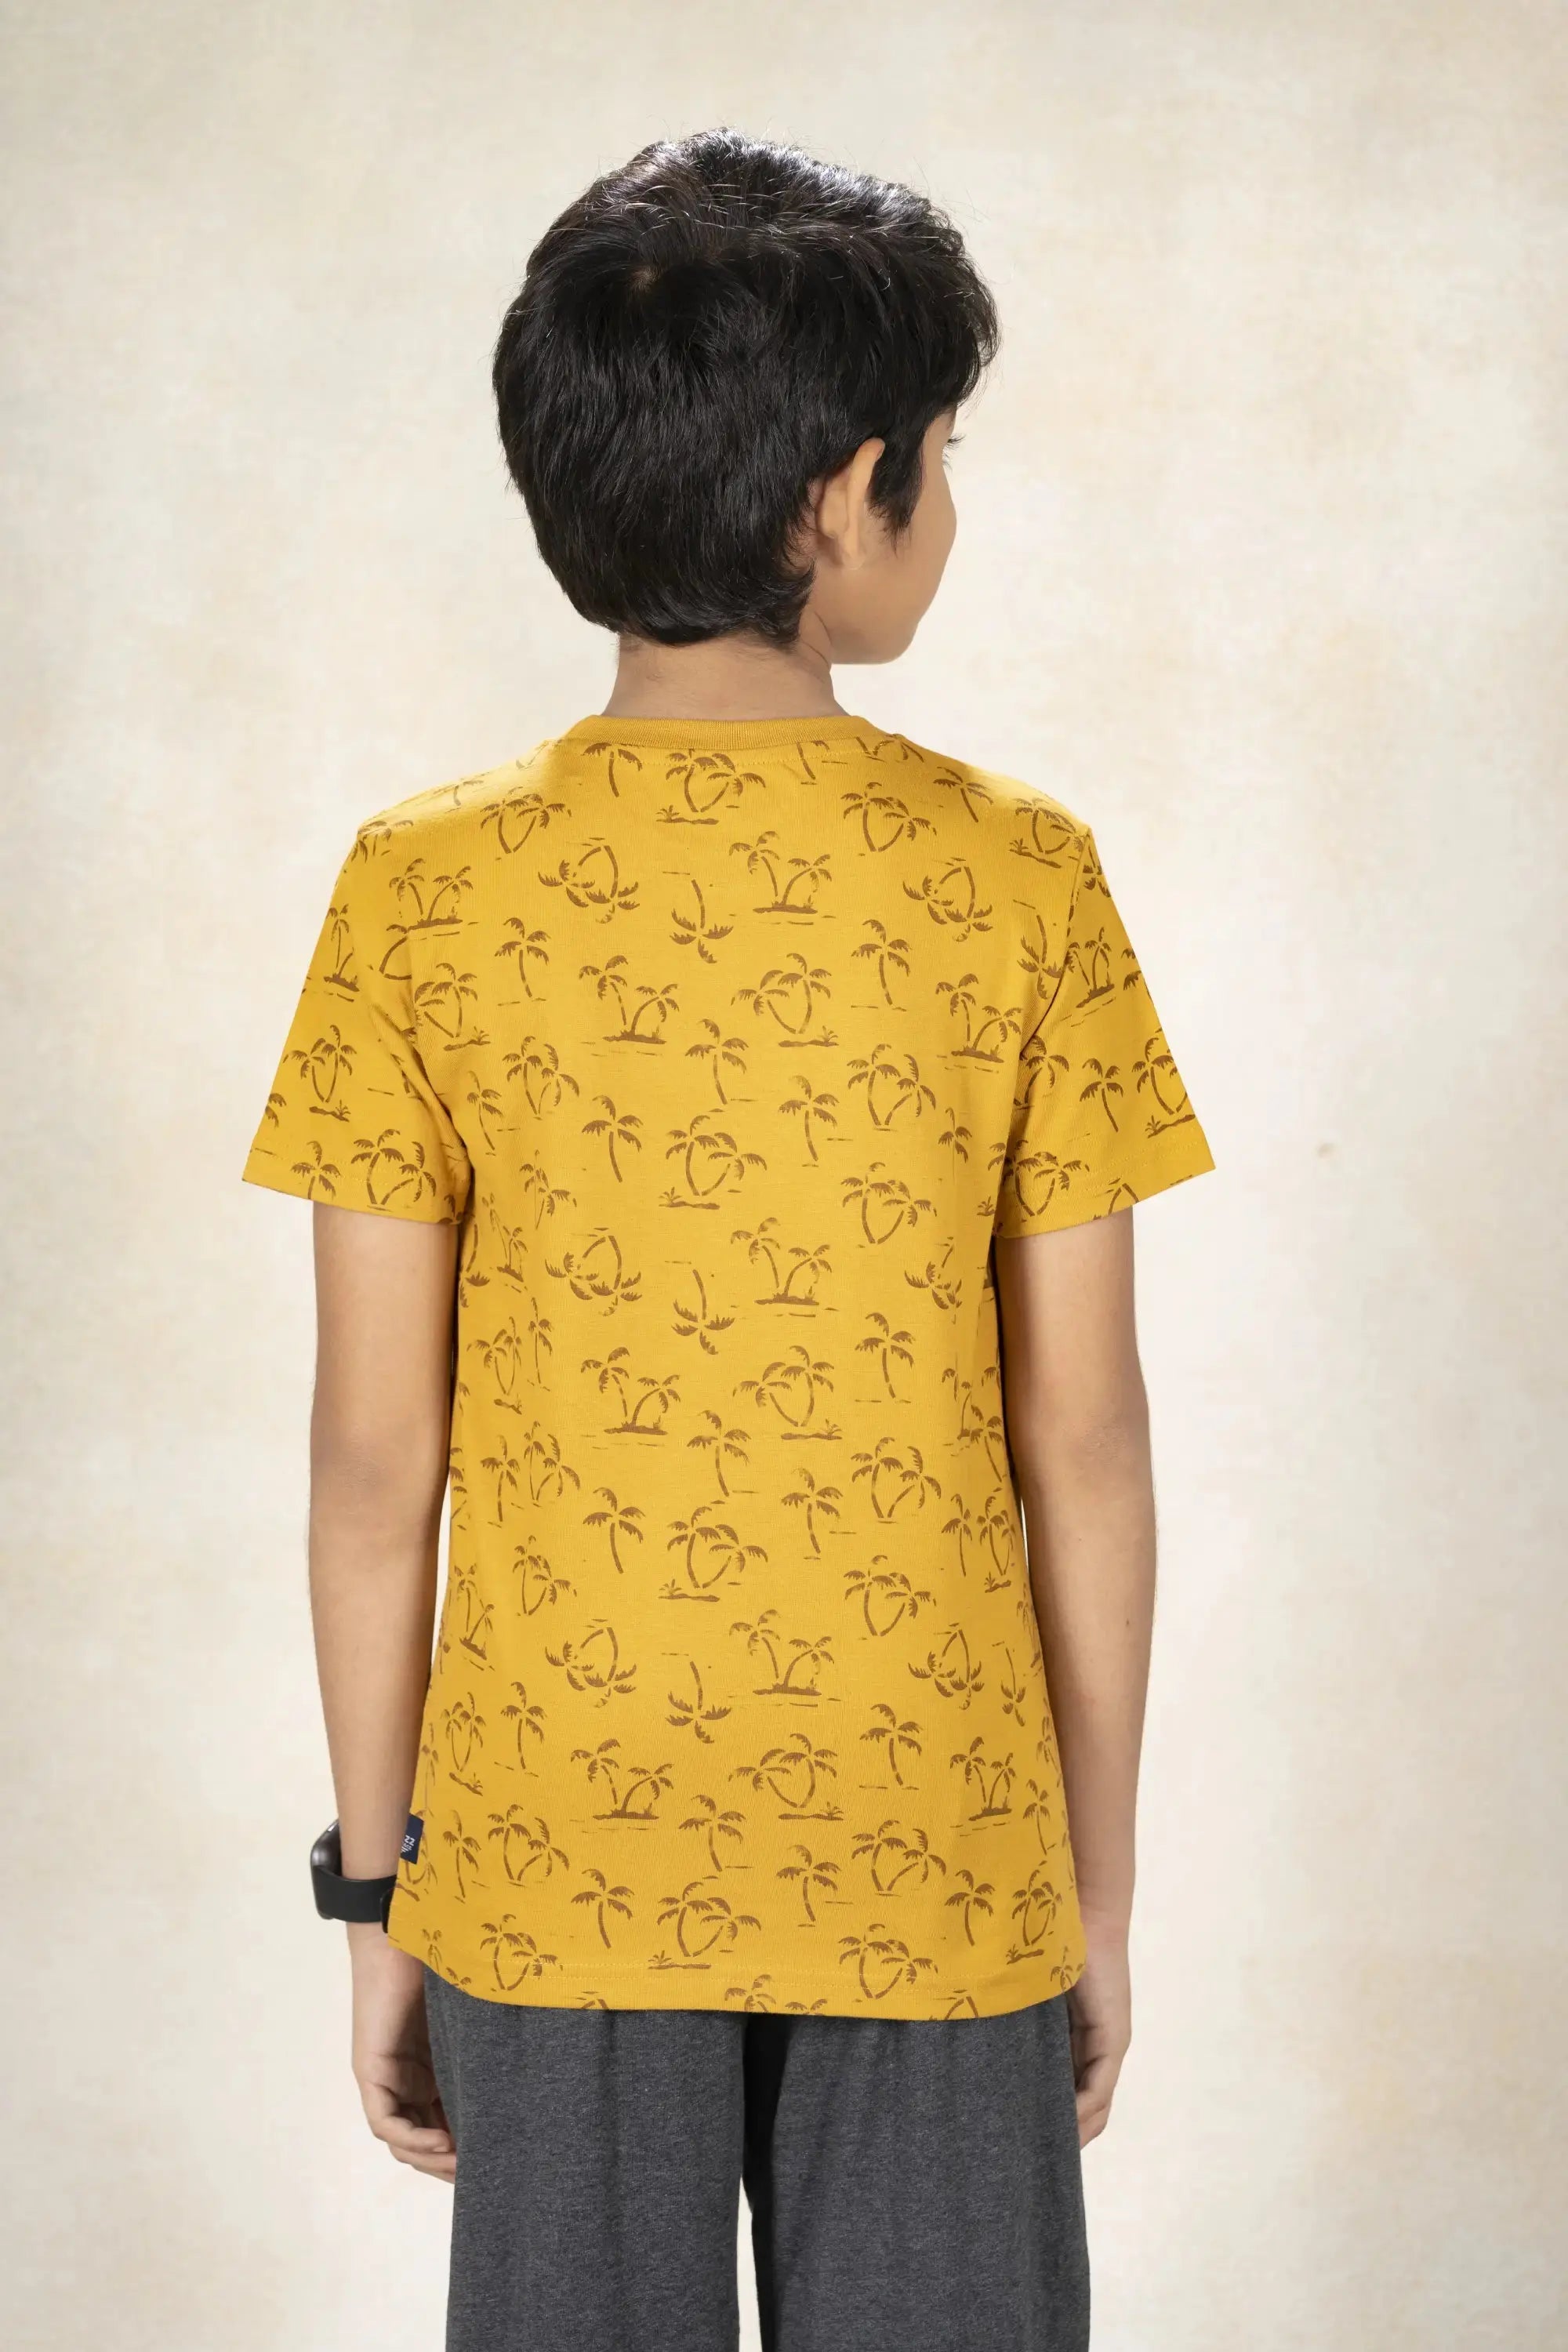 Boys Round Neck Printed T-Shirt MR YEZZ #color_Mineral Yellow